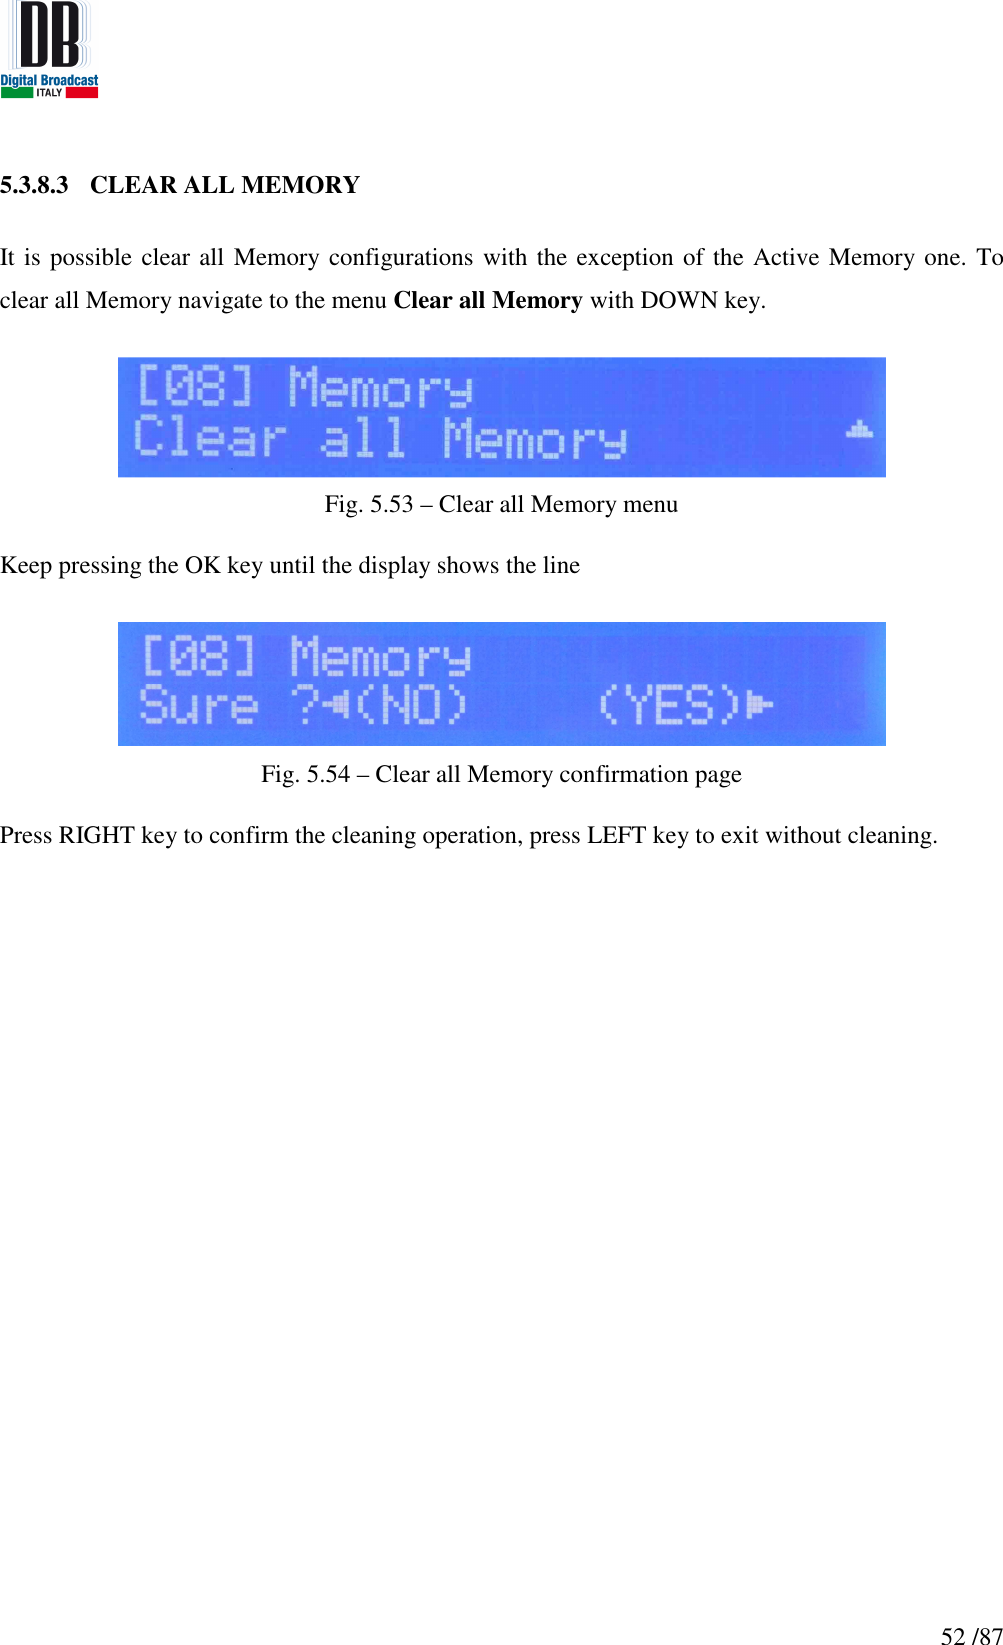   52 /87 5.3.8.3 CLEAR ALL MEMORY  It is possible clear all  Memory configurations with the exception of the Active Memory one. To clear all Memory navigate to the menu Clear all Memory with DOWN key.   Fig. 5.53 – Clear all Memory menu  Keep pressing the OK key until the display shows the line   Fig. 5.54 – Clear all Memory confirmation page  Press RIGHT key to confirm the cleaning operation, press LEFT key to exit without cleaning.     